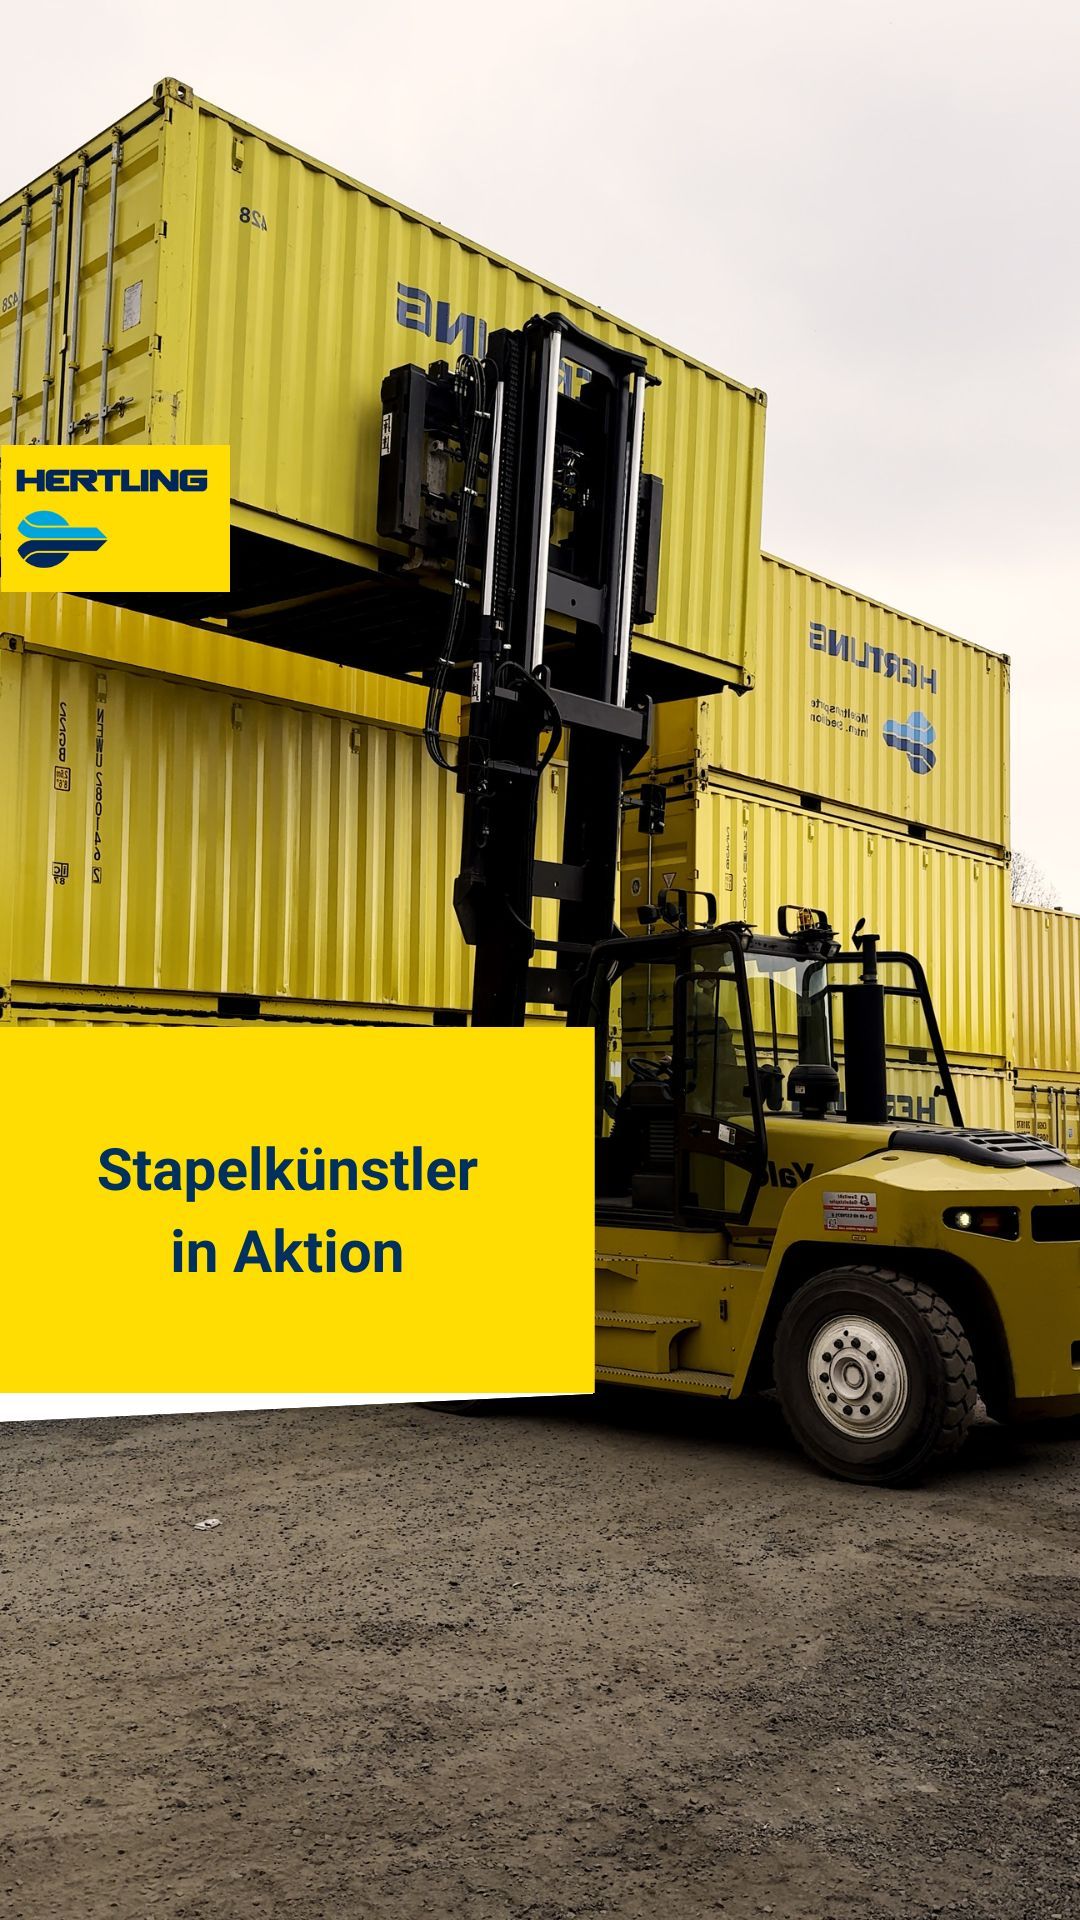 Forklift carrying a Hertling container